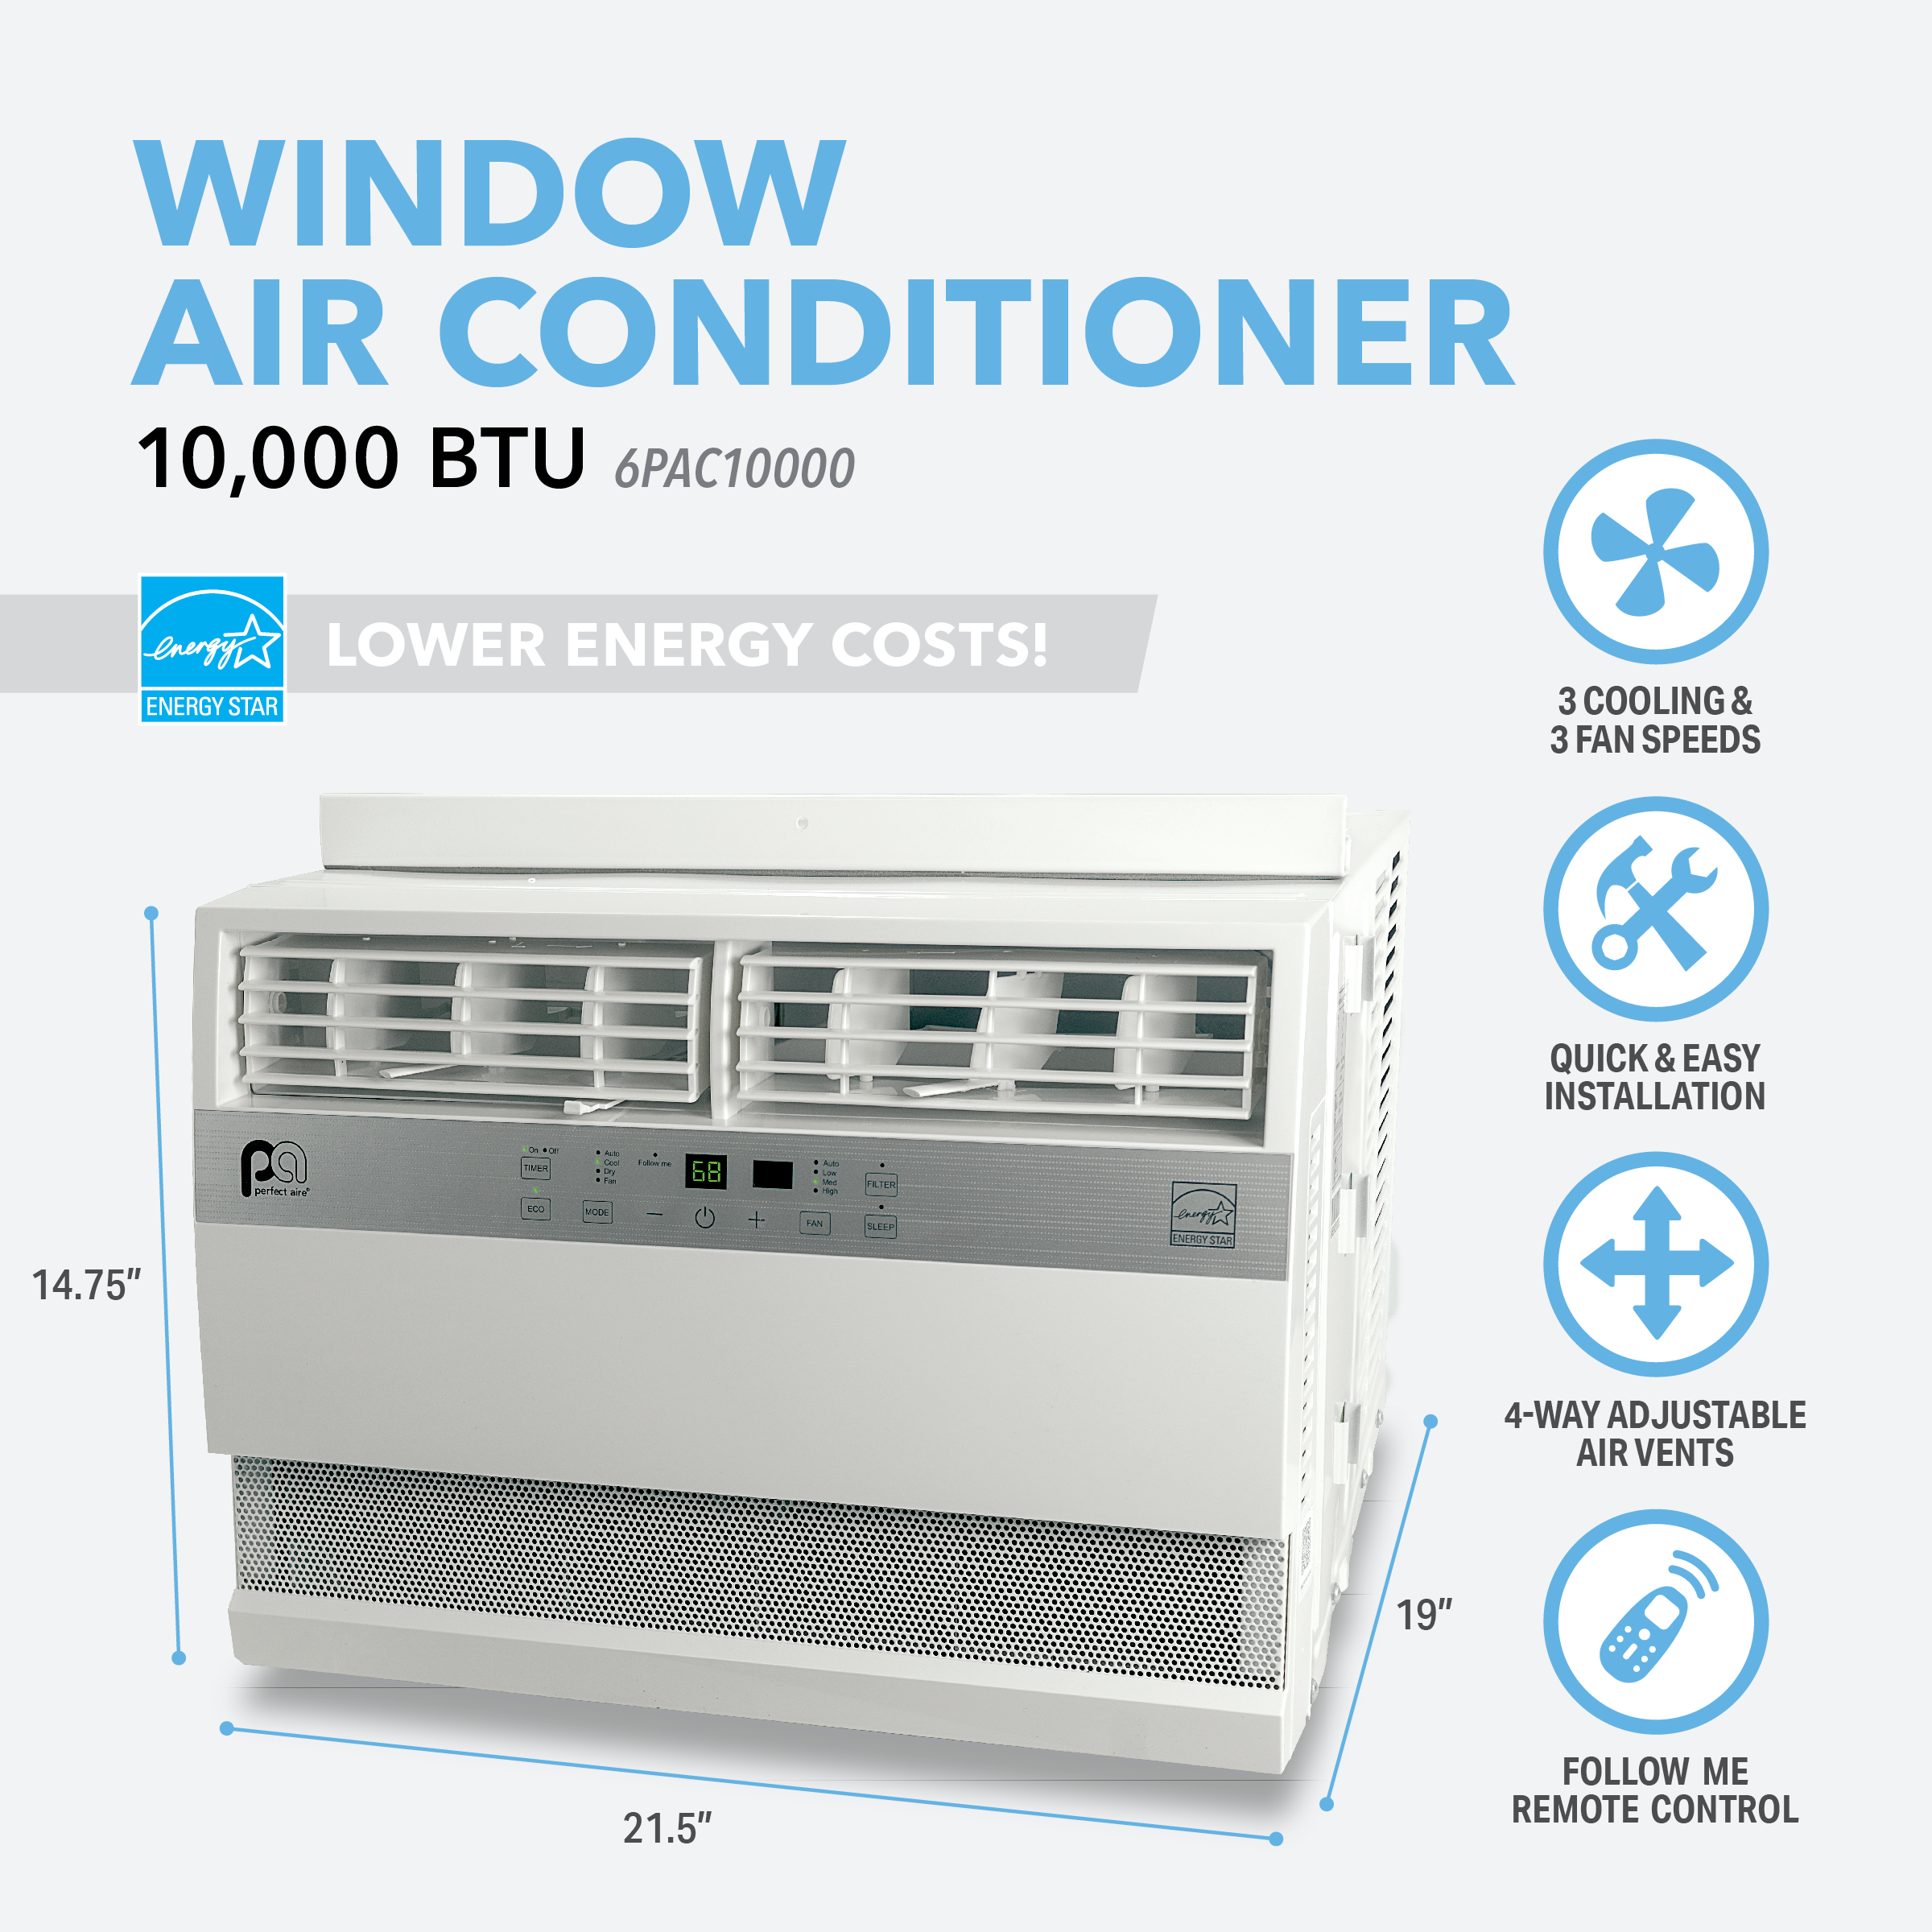 6PAC10000 Perfect Aire 10,000 BTU Flat Panel Window Room Air Conditioner, Sq. ft: 400-450 Coverage, With Remote Control